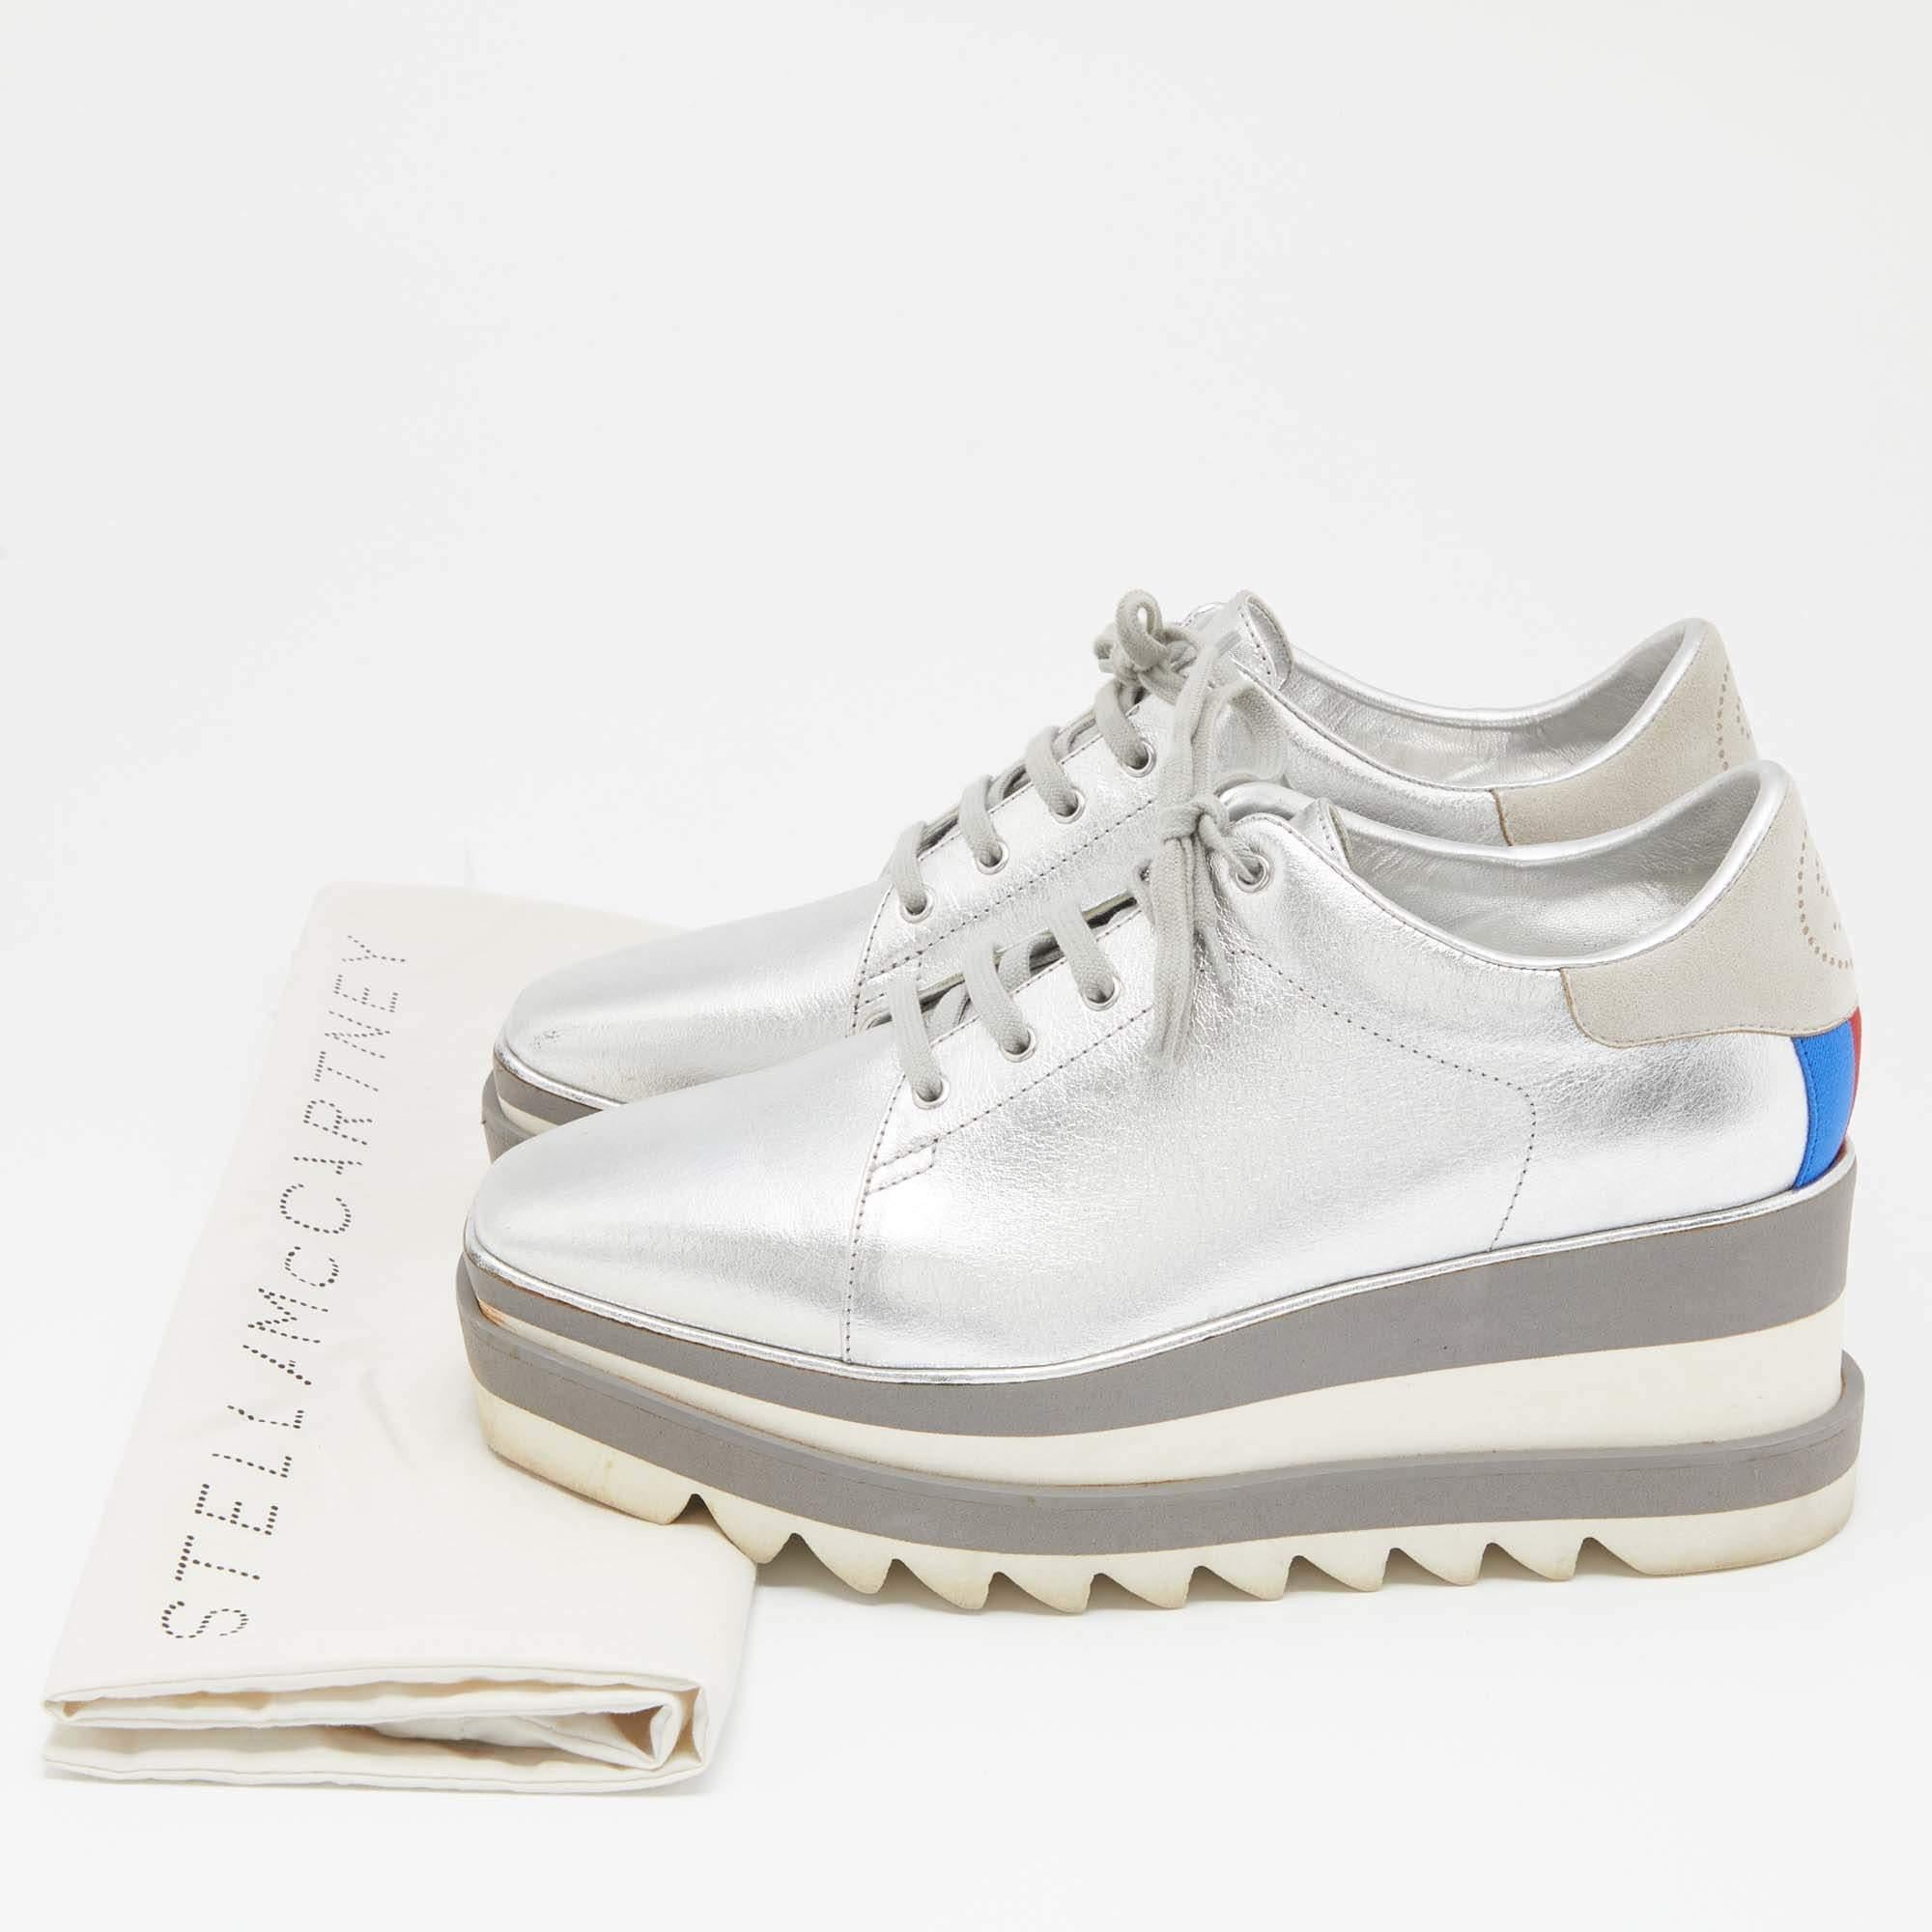 Stella McCartney Silver Faux Leather and Faux Suede Elyse Sneakers Size 39 4